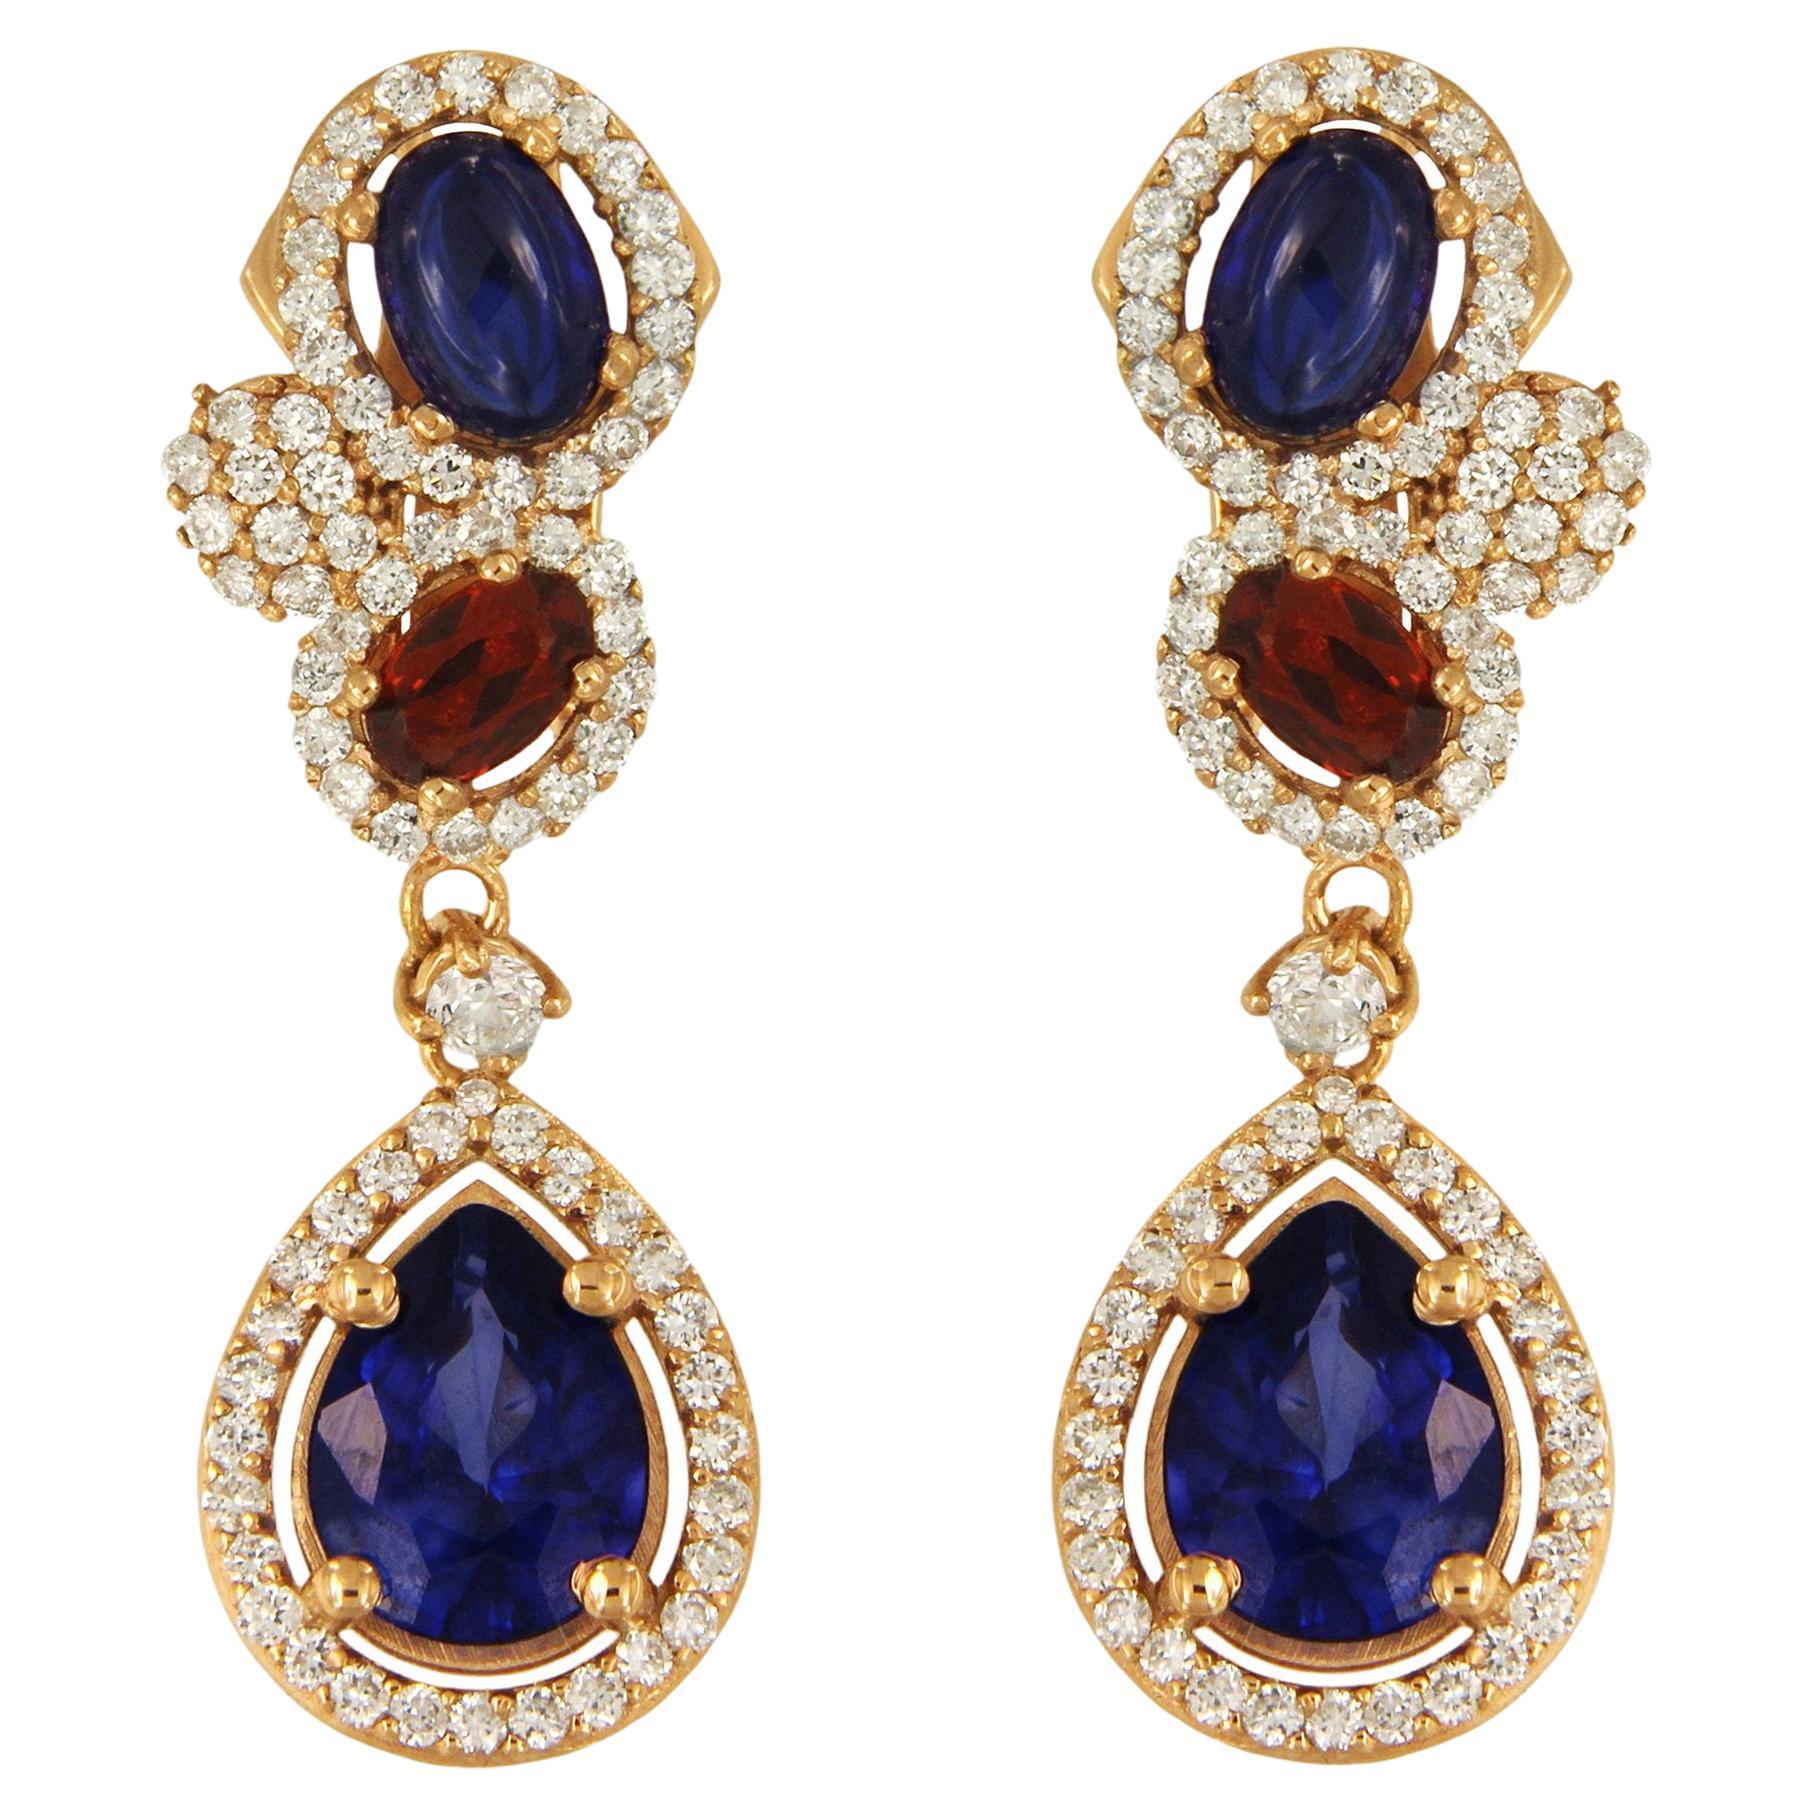 Fancy Drop Earrings with Garnet and Sapphire For Sale